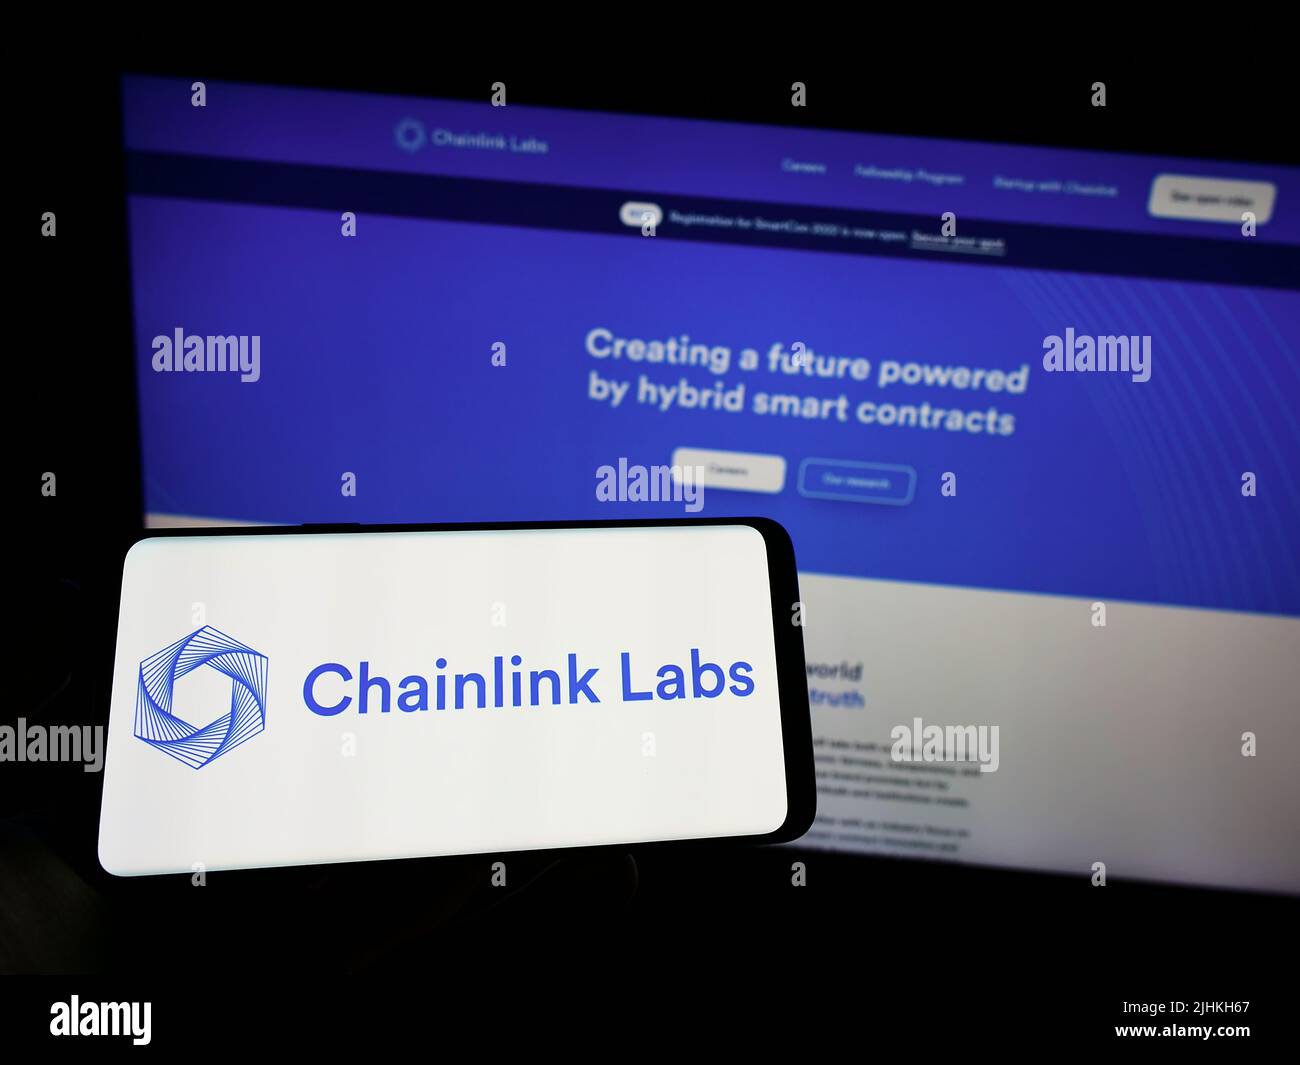 Person holding mobile phone with logo of American blockchain company Chainlink Labs on screen in front of web page. Focus on phone display. Stock Photo